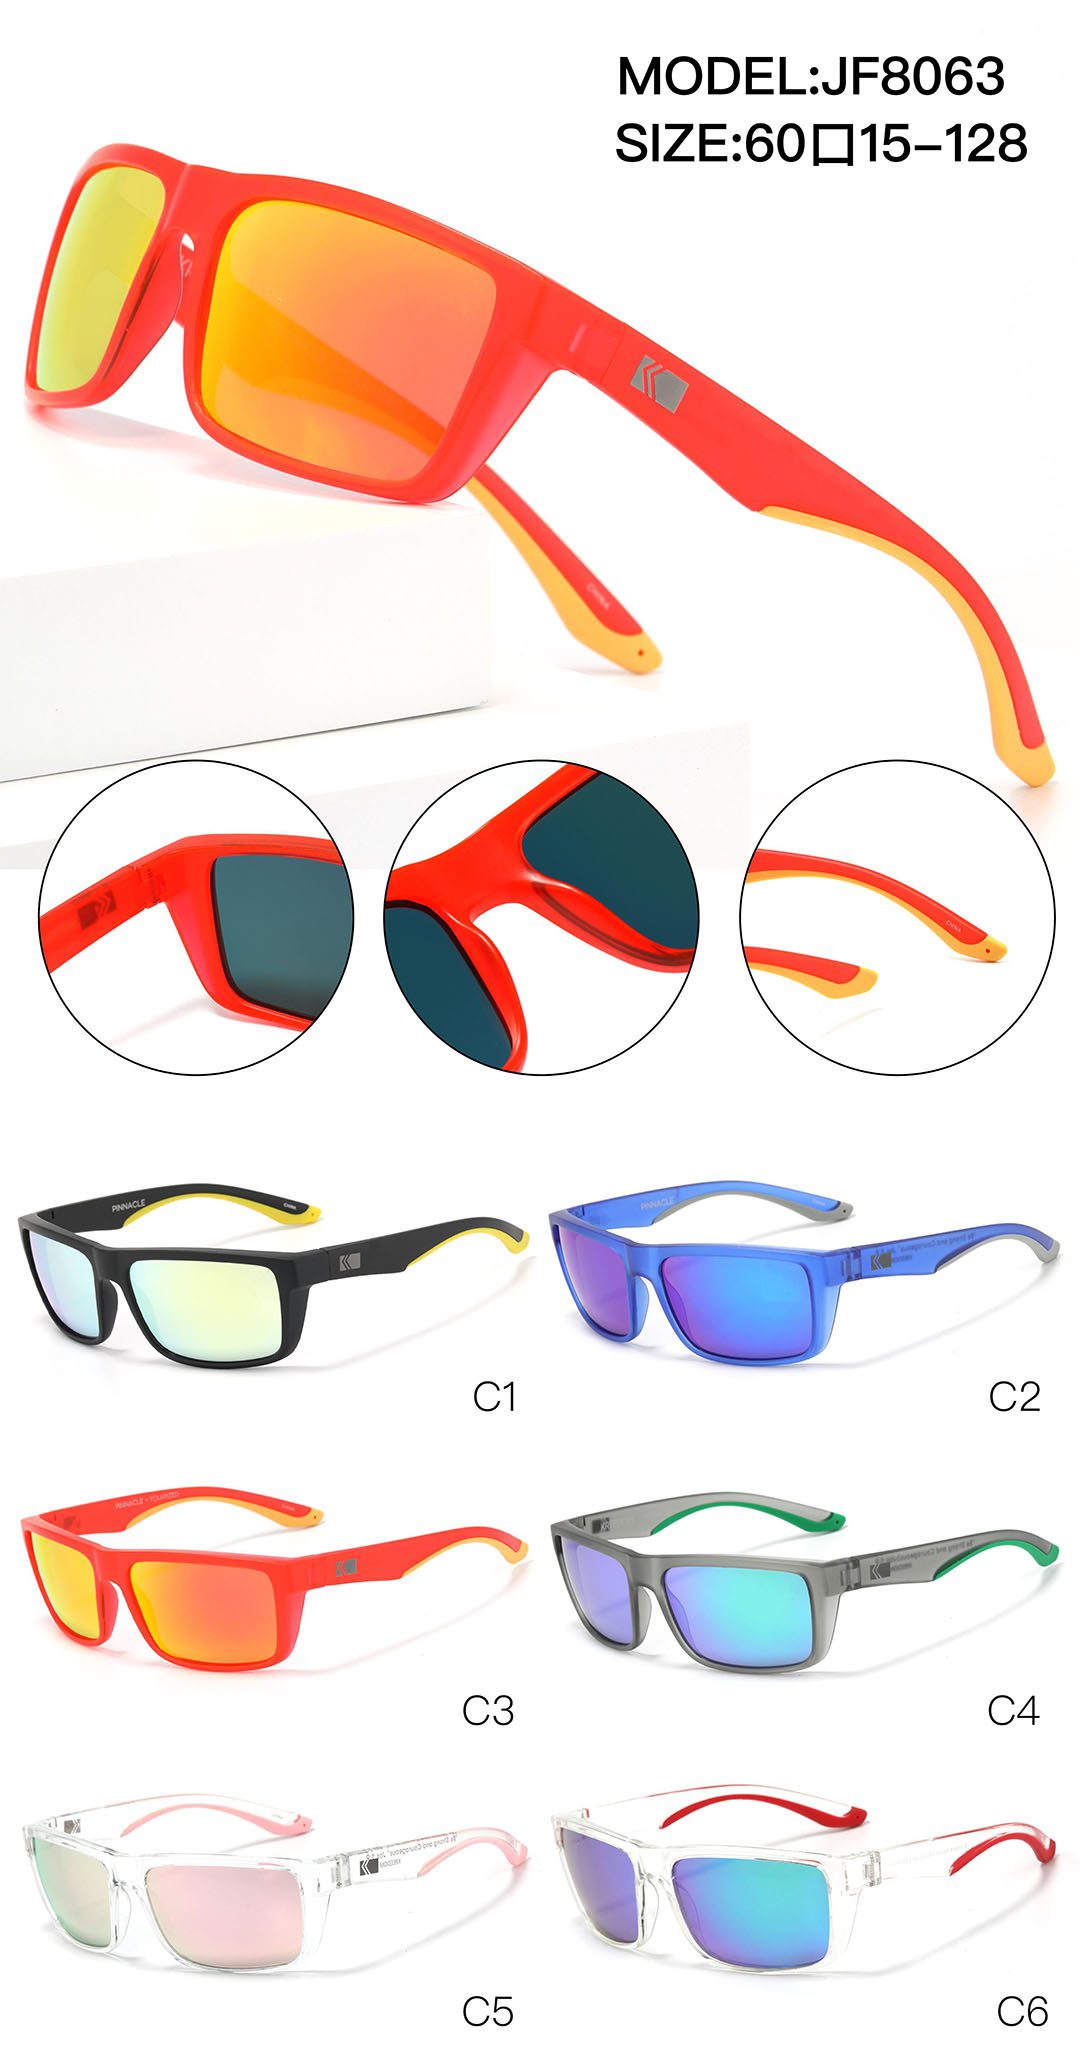 Multifunction Sunglasses JF8063 Different Colors Size Detail Shooting